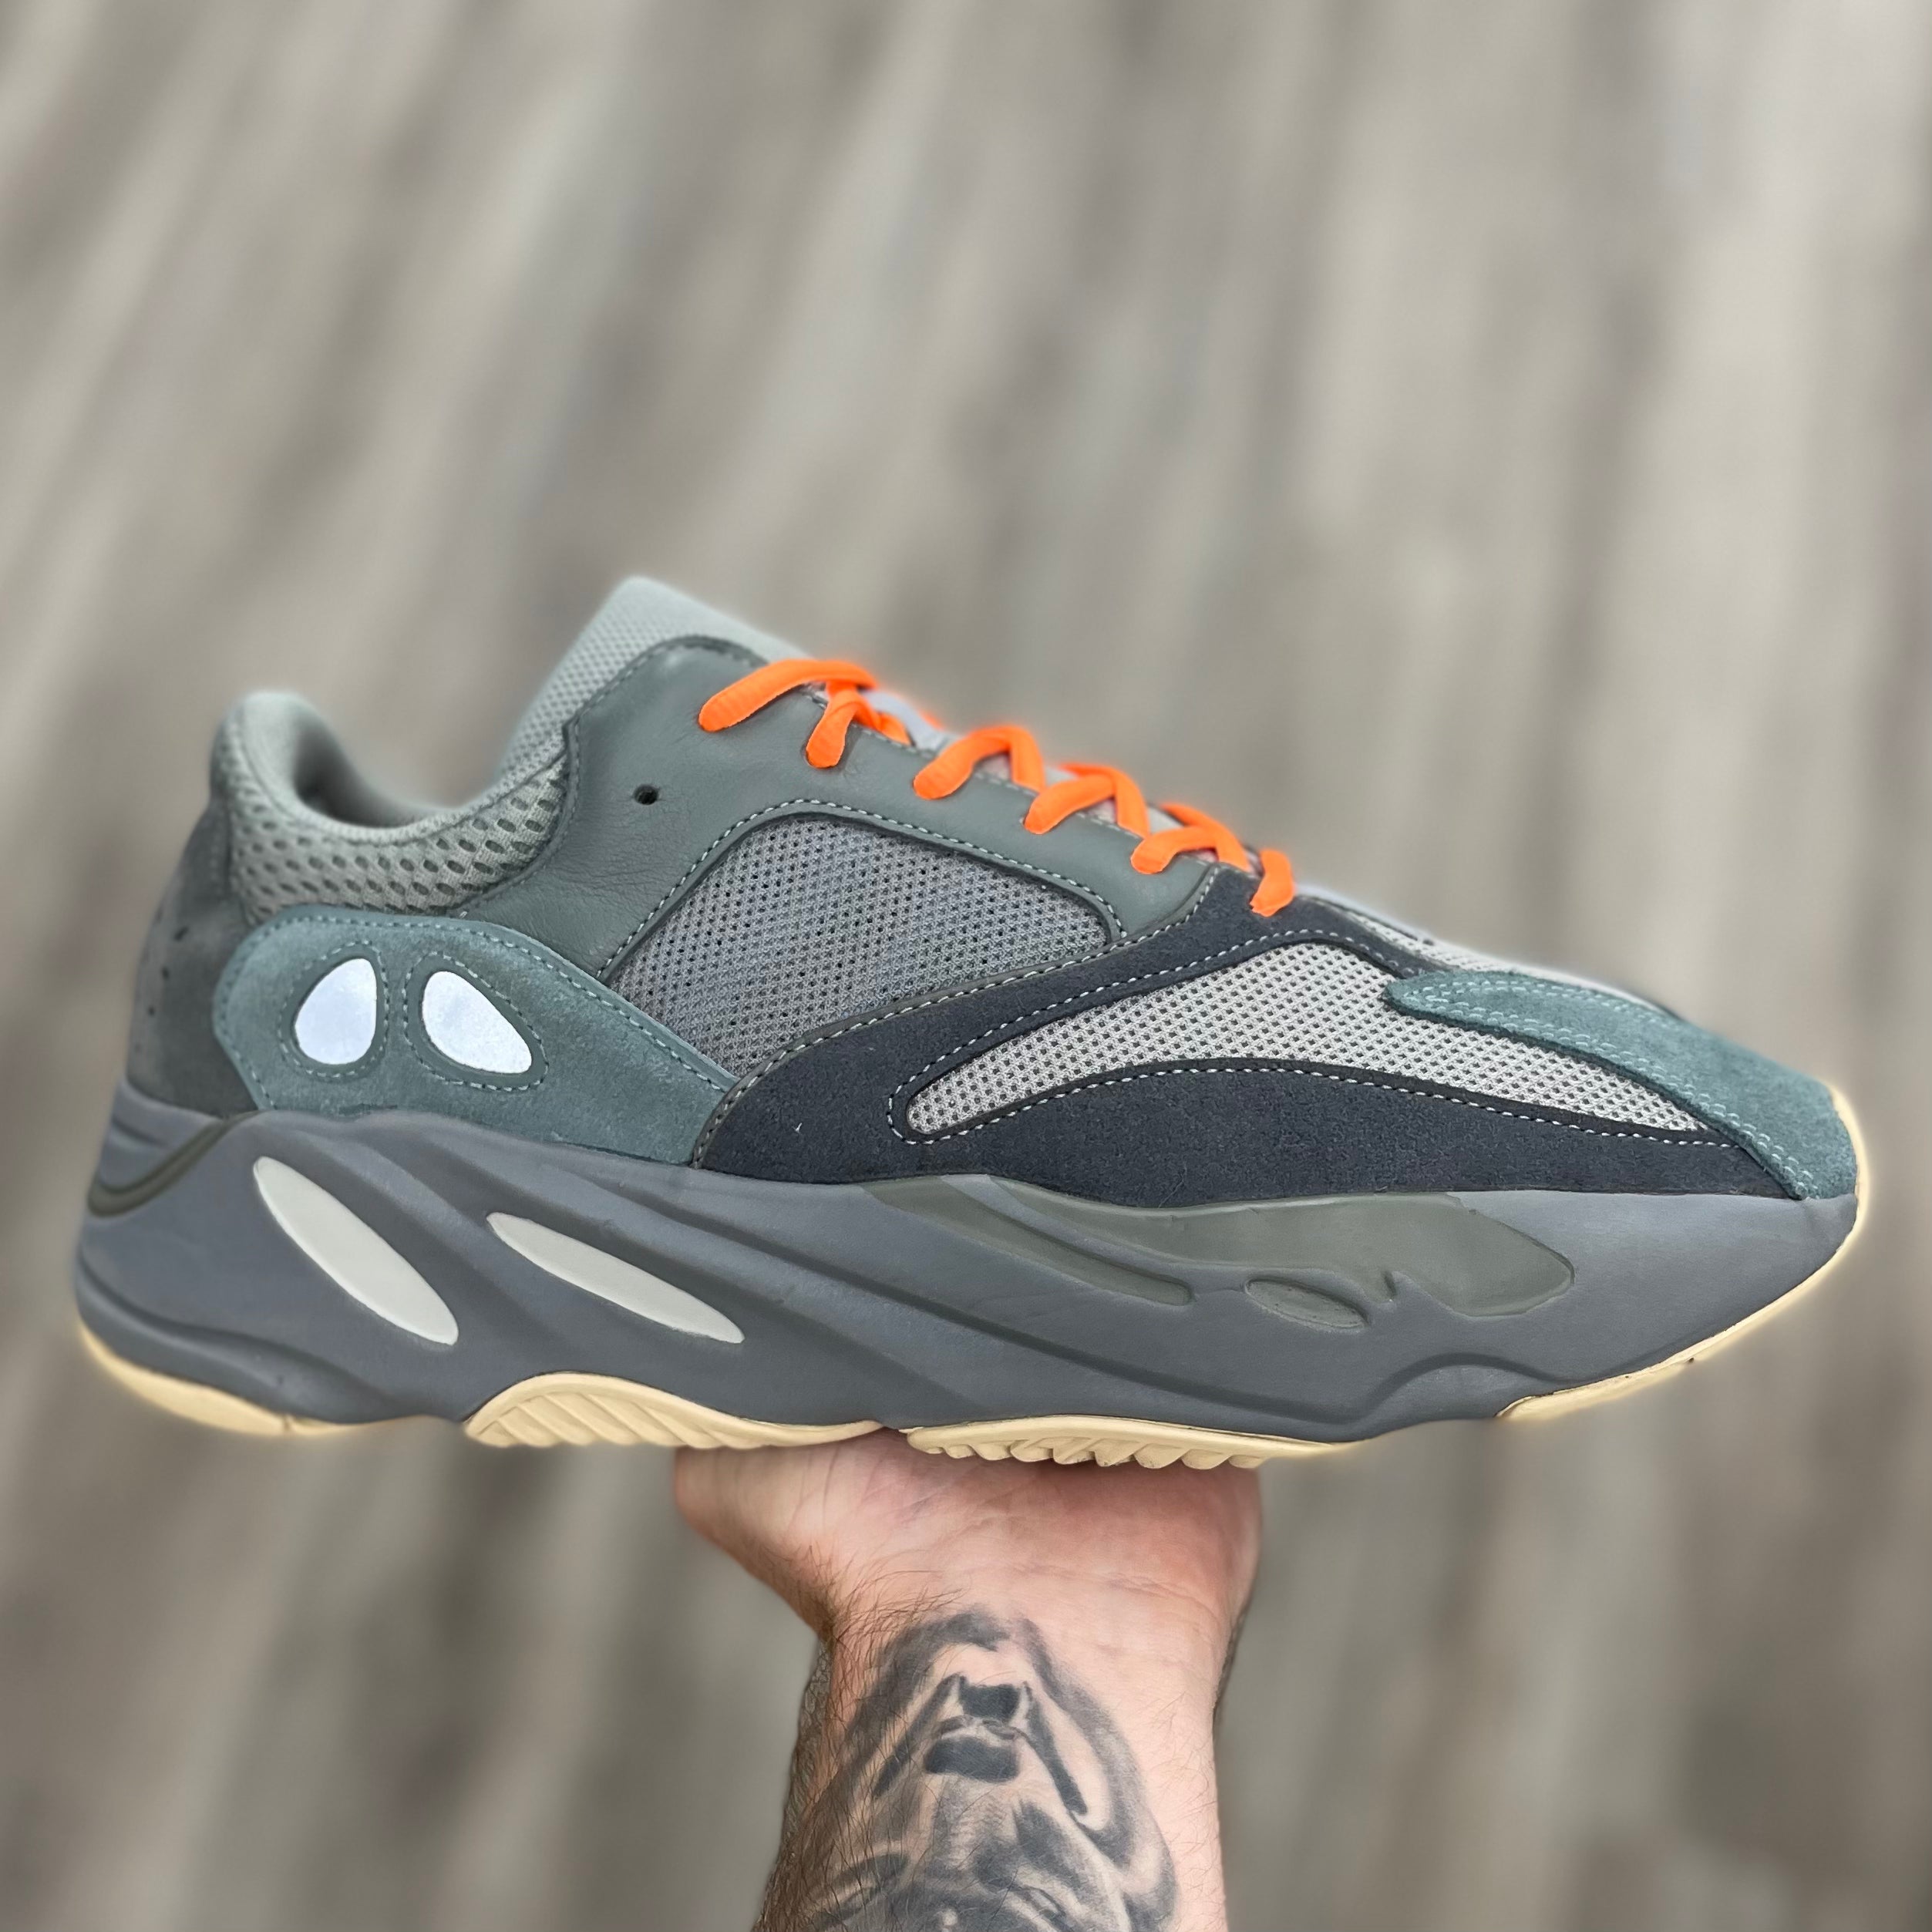 Adidas Yeezy Boost 700 “Teal Blue” | Request